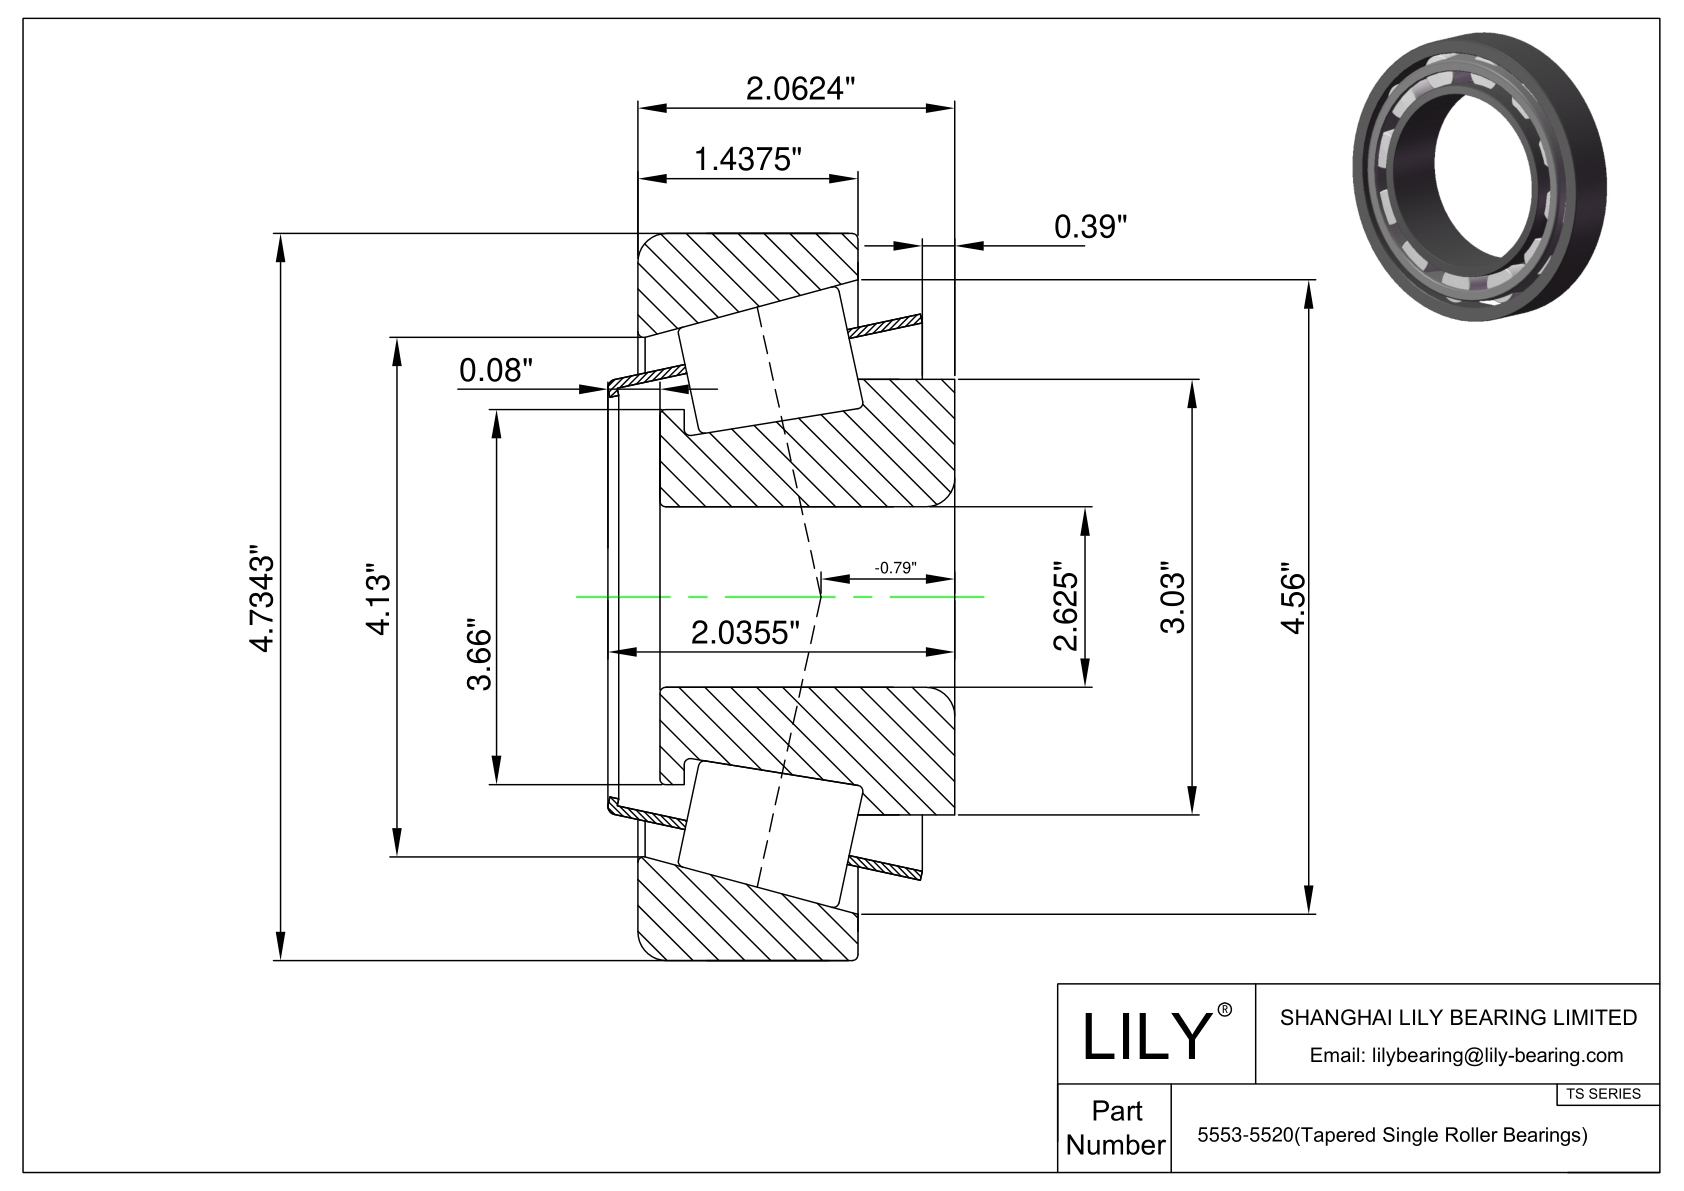 5553-5520 TS (Tapered Single Roller Bearings) (Imperial) cad drawing